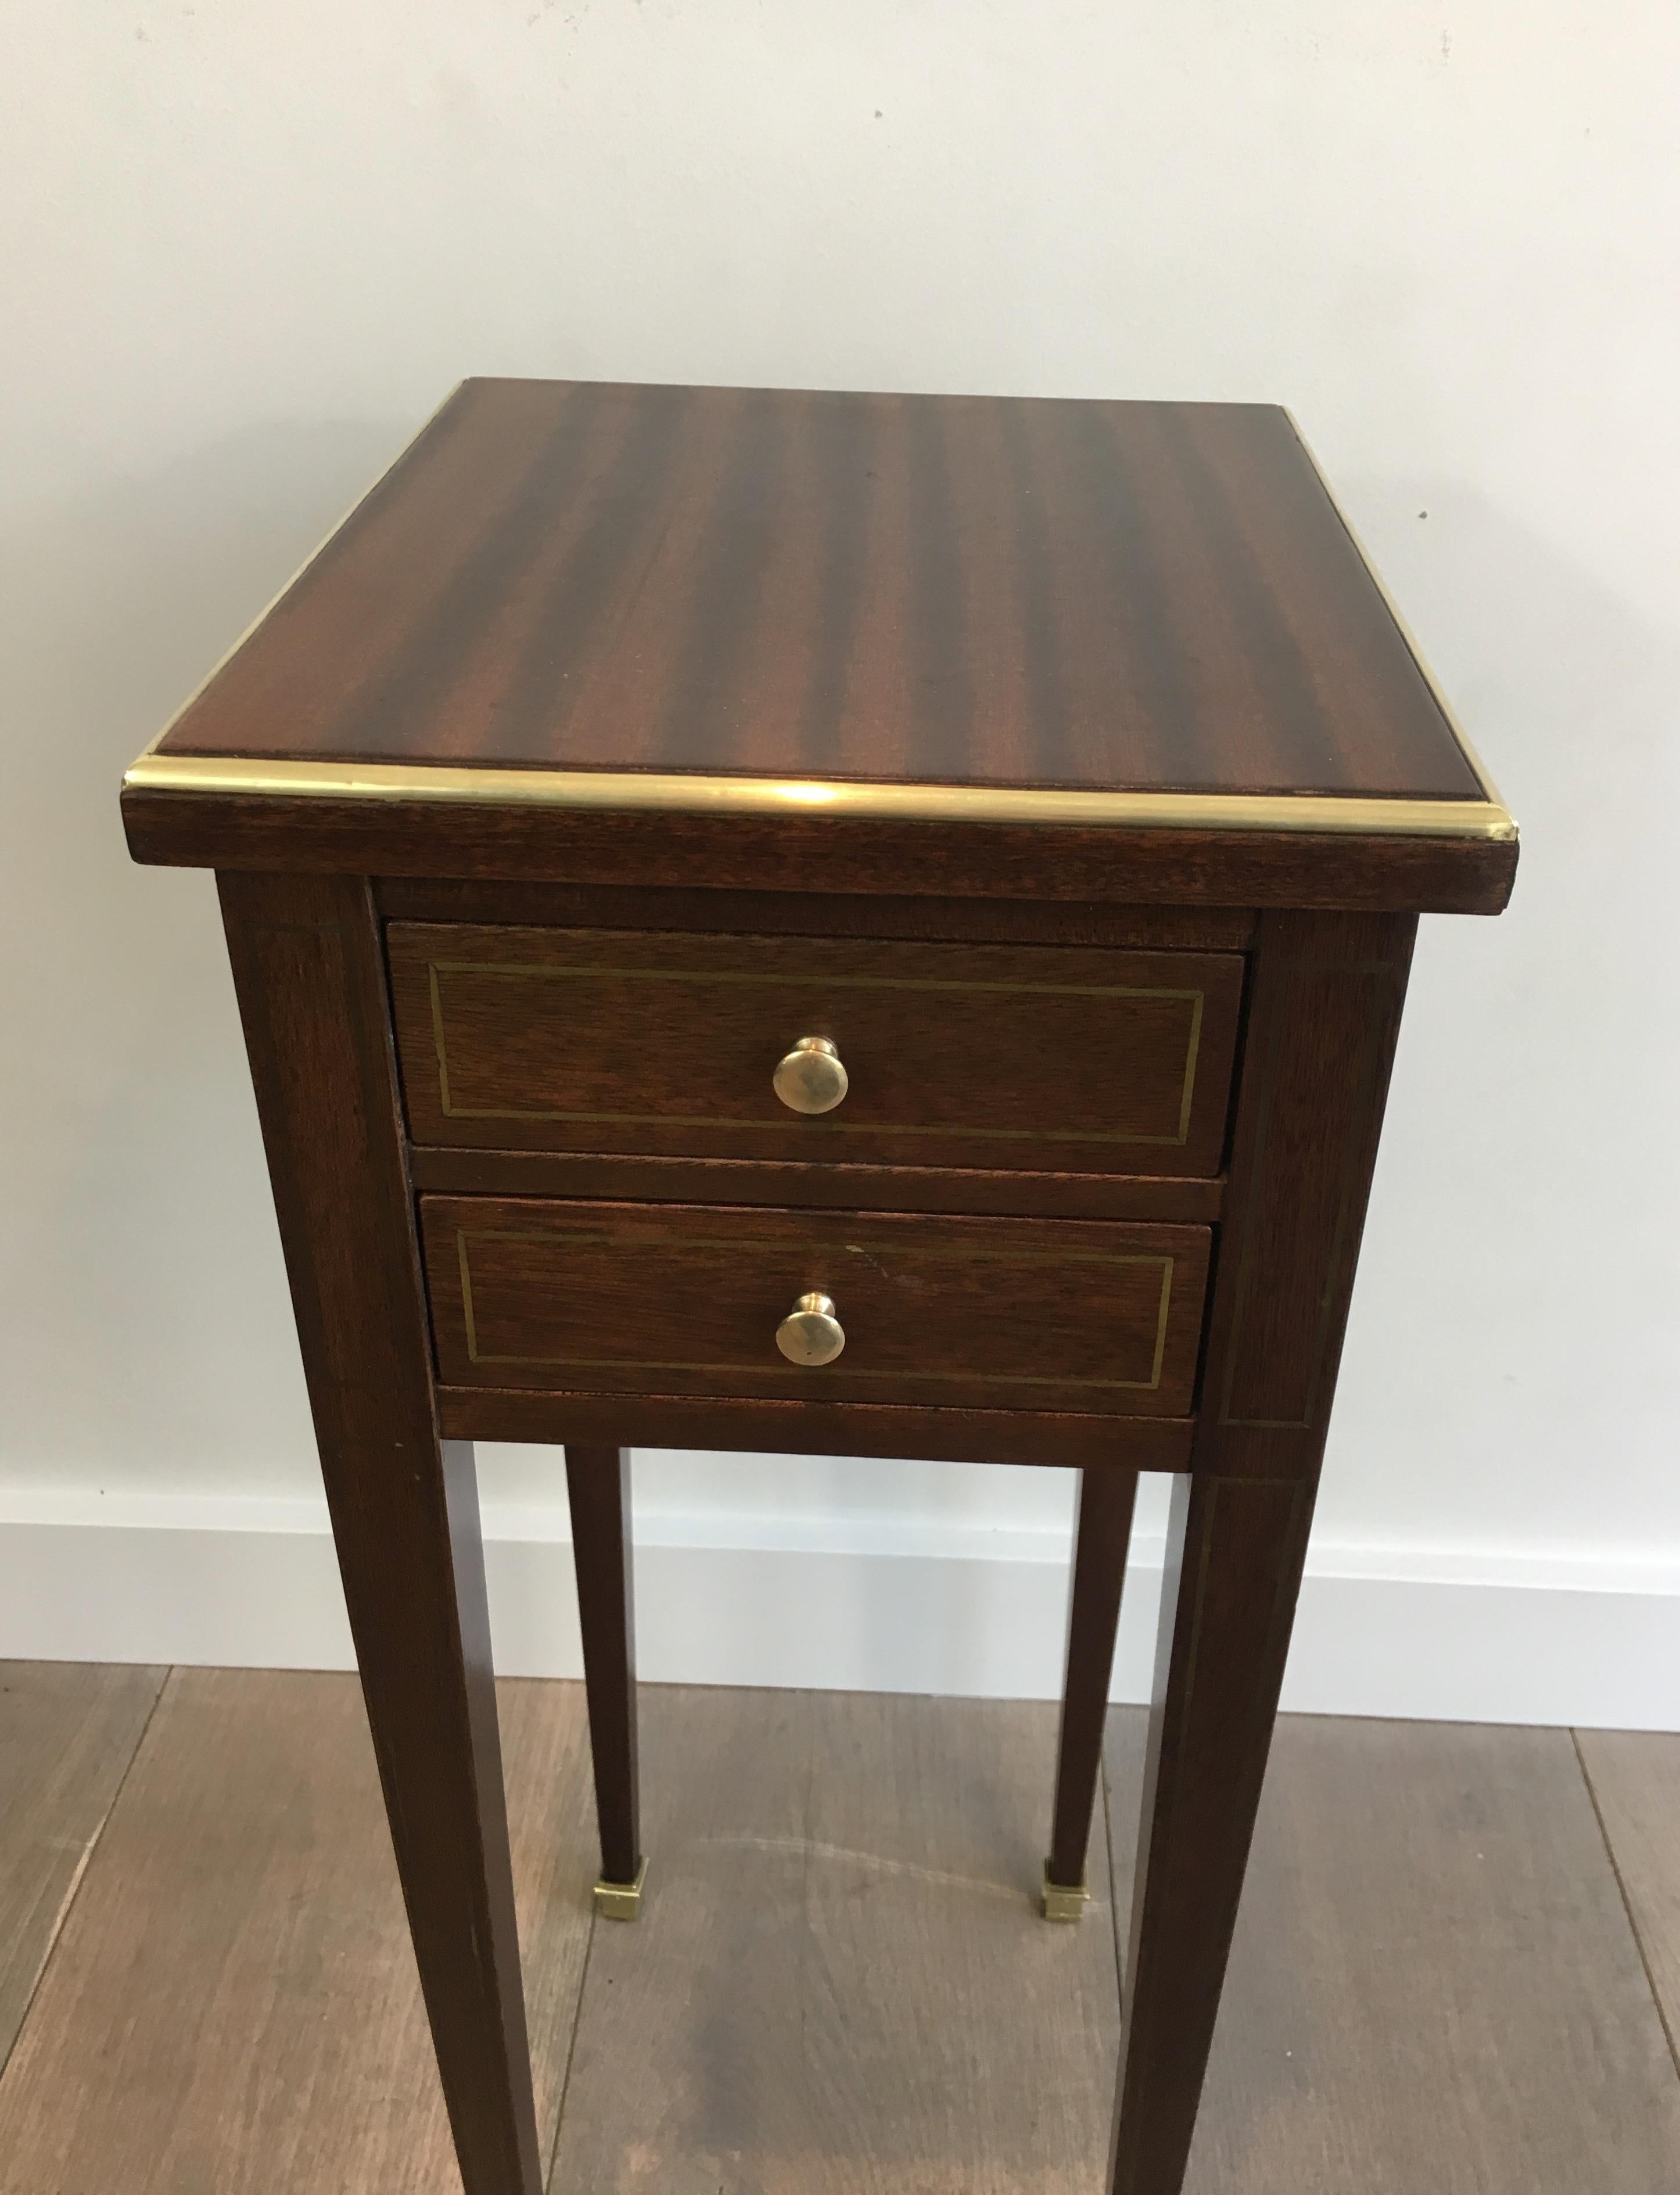 Unusual Neoclassical Small Drawers Table with Sliding Ashtrays 2